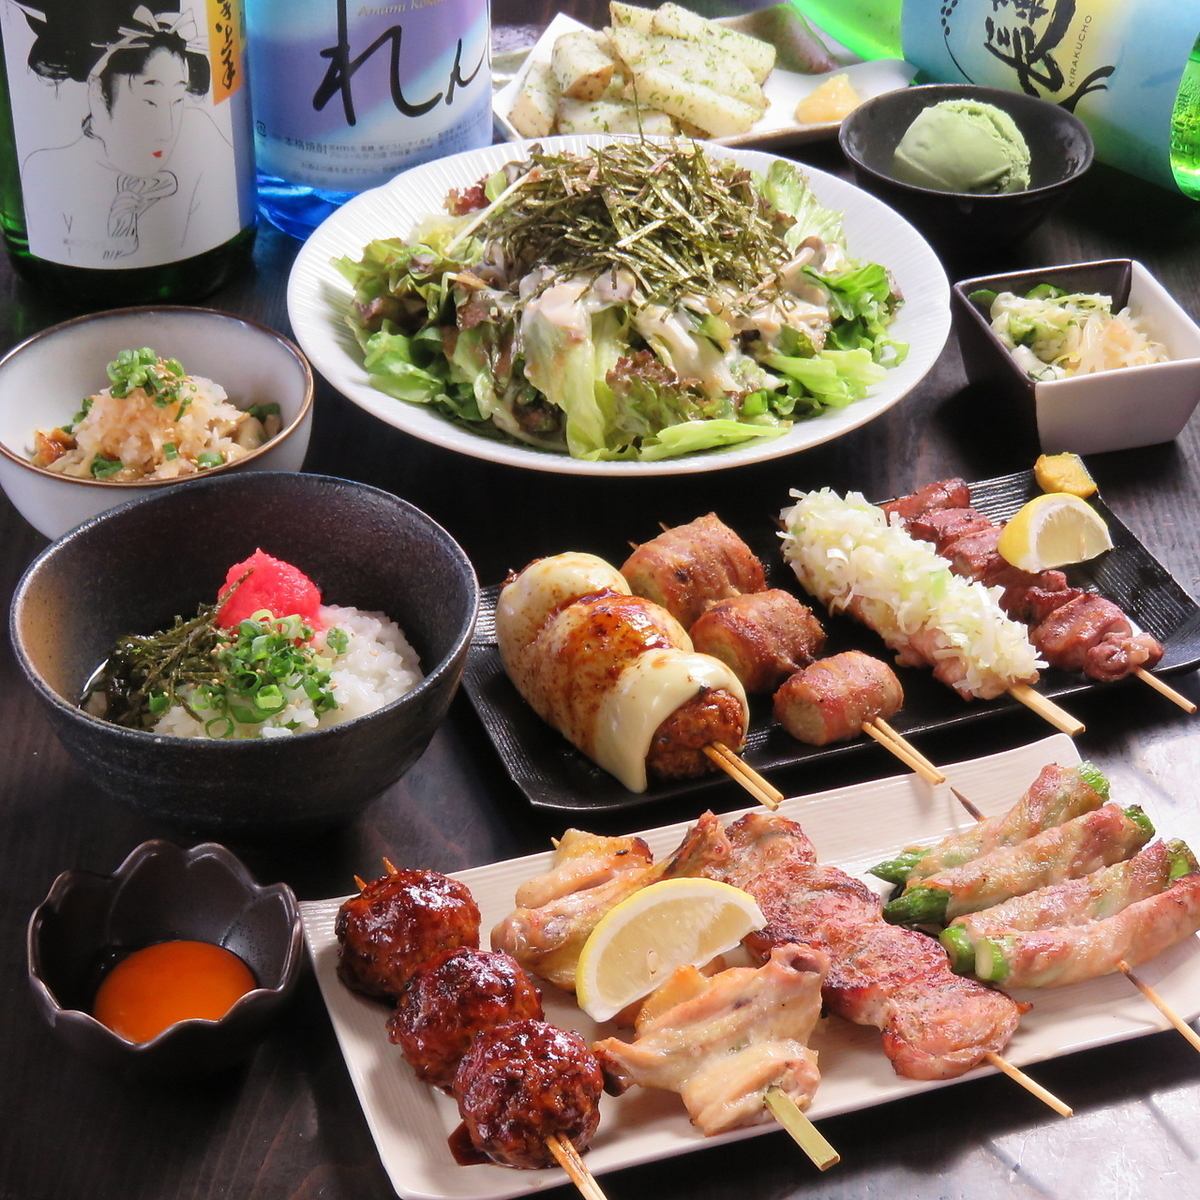 We are proud of yakitori and yakitori, which are carefully baked with Bincho charcoal.